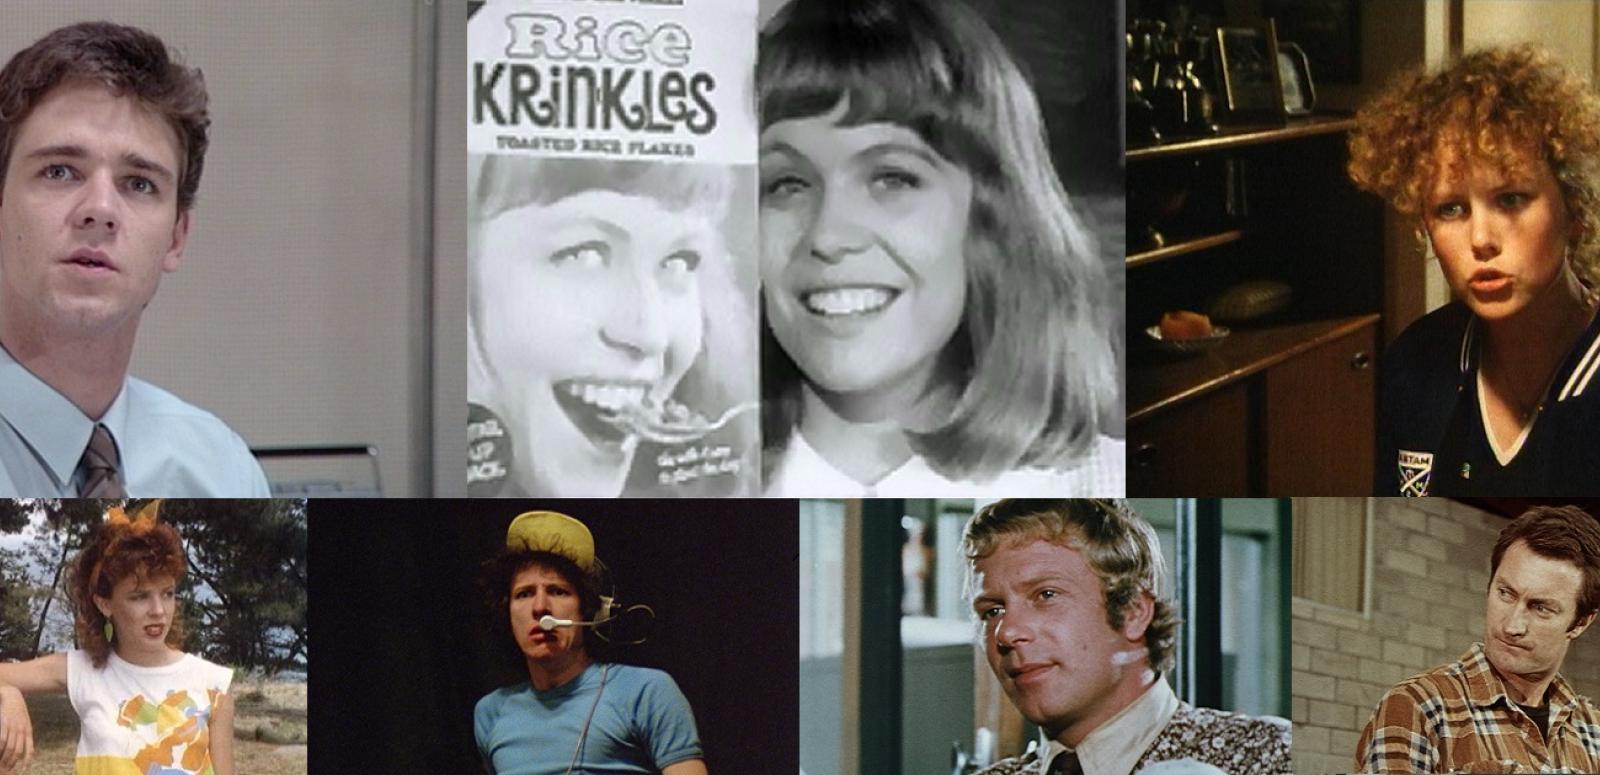 Collage of photos titled "Before they were famous", featuring Russell Crowe, Jacki Weaver, Nicole Kidman, Kylie Minogue, Geoffrey Rush, Jack Thompson and Bryan Brown